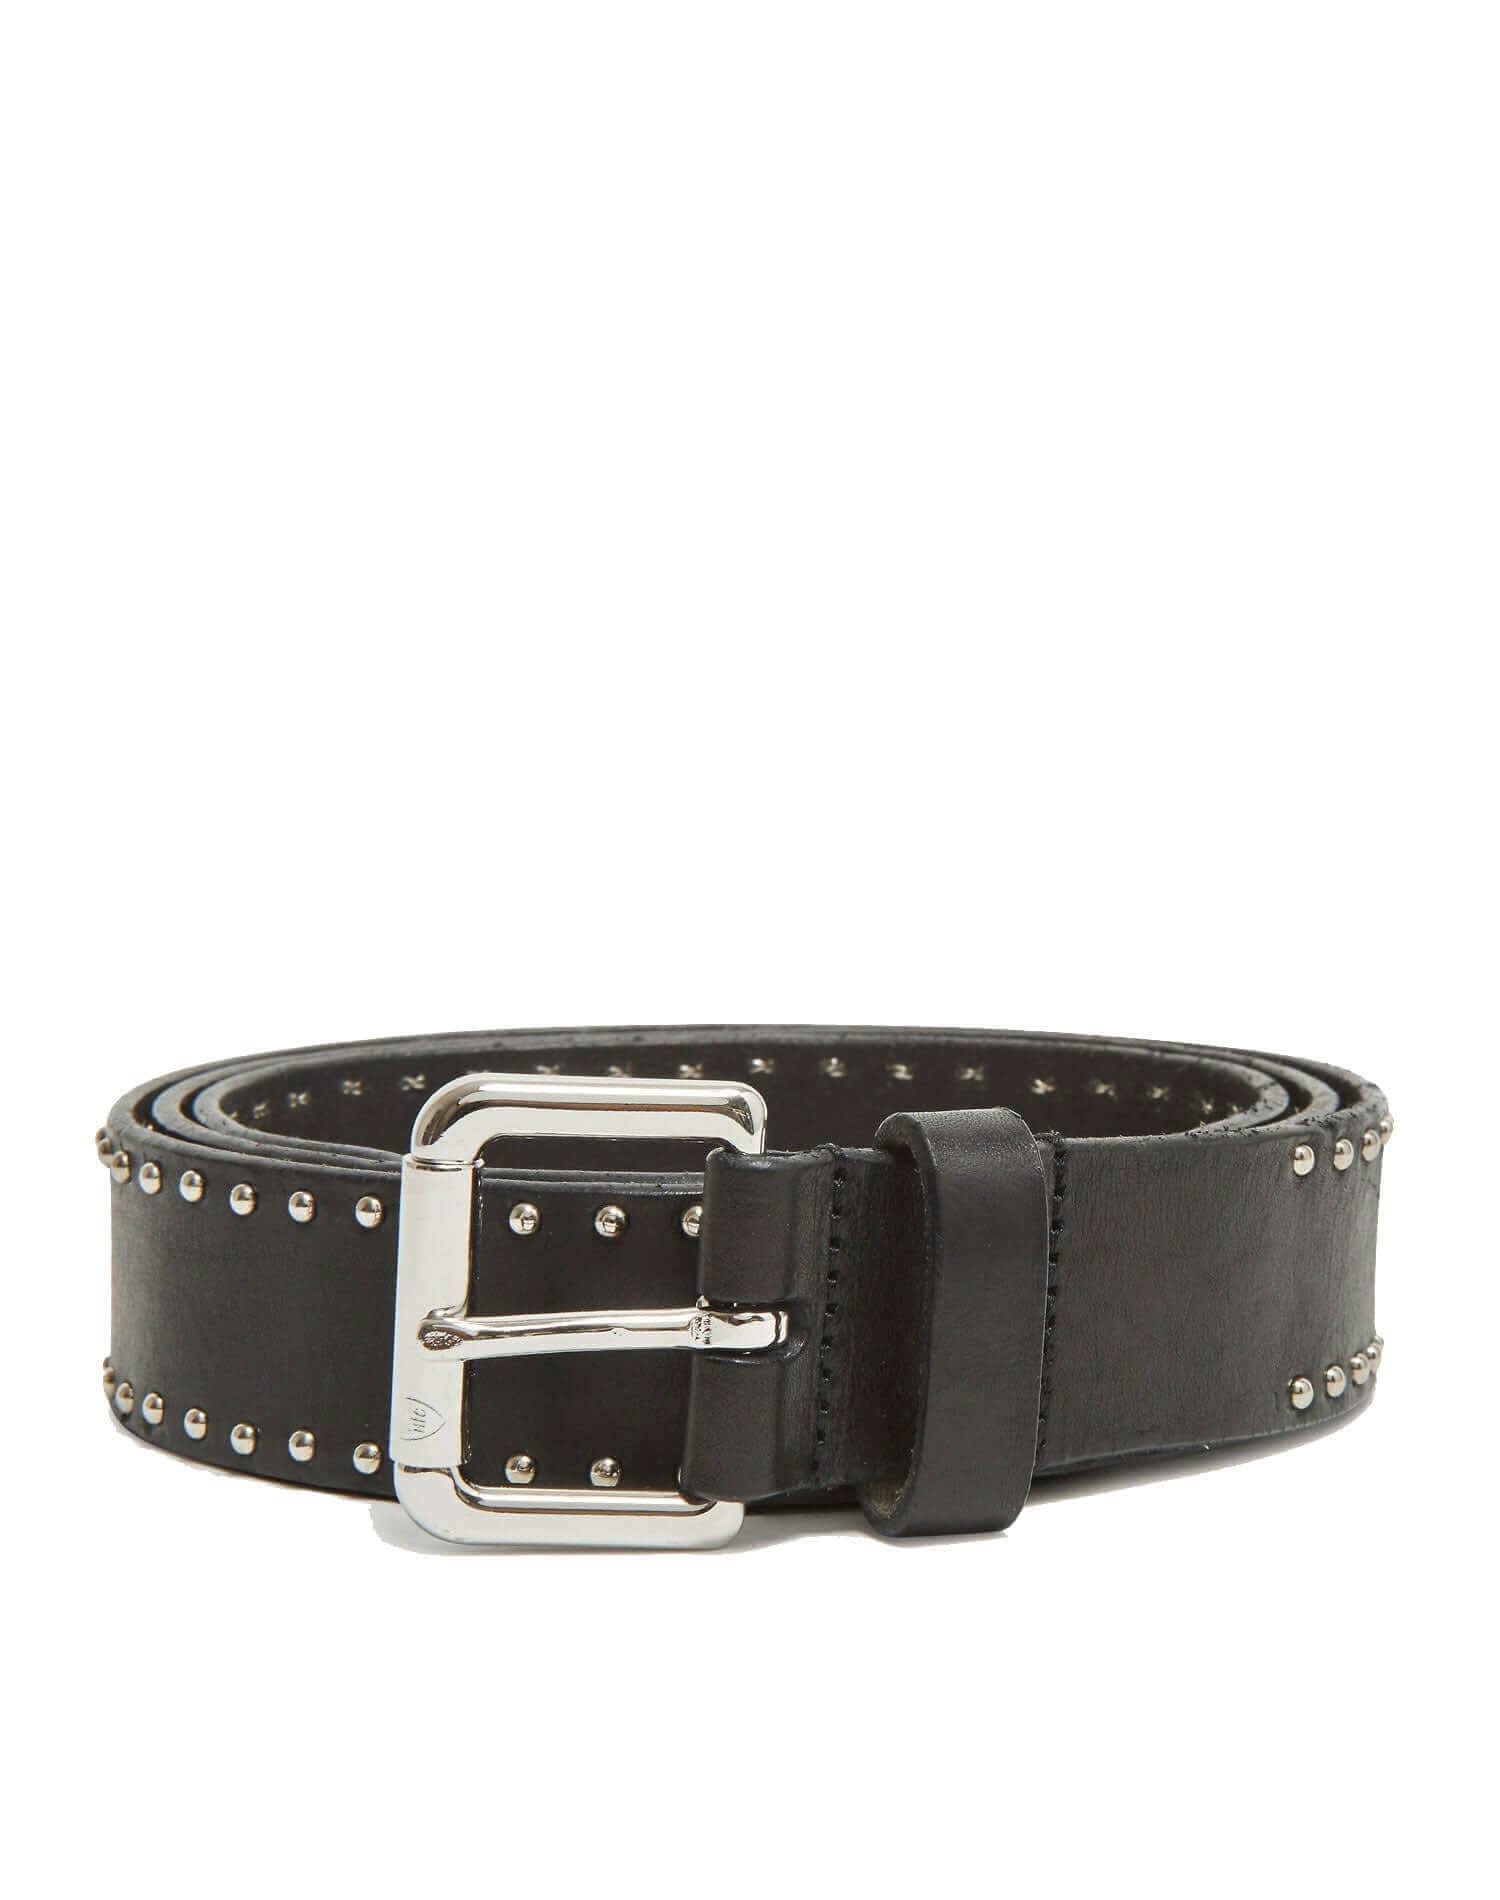 BASIC BELT Black leather belt, metal buckle, decorated with studs. Height: 3 cm. Made in Italy HTC LOS ANGELES